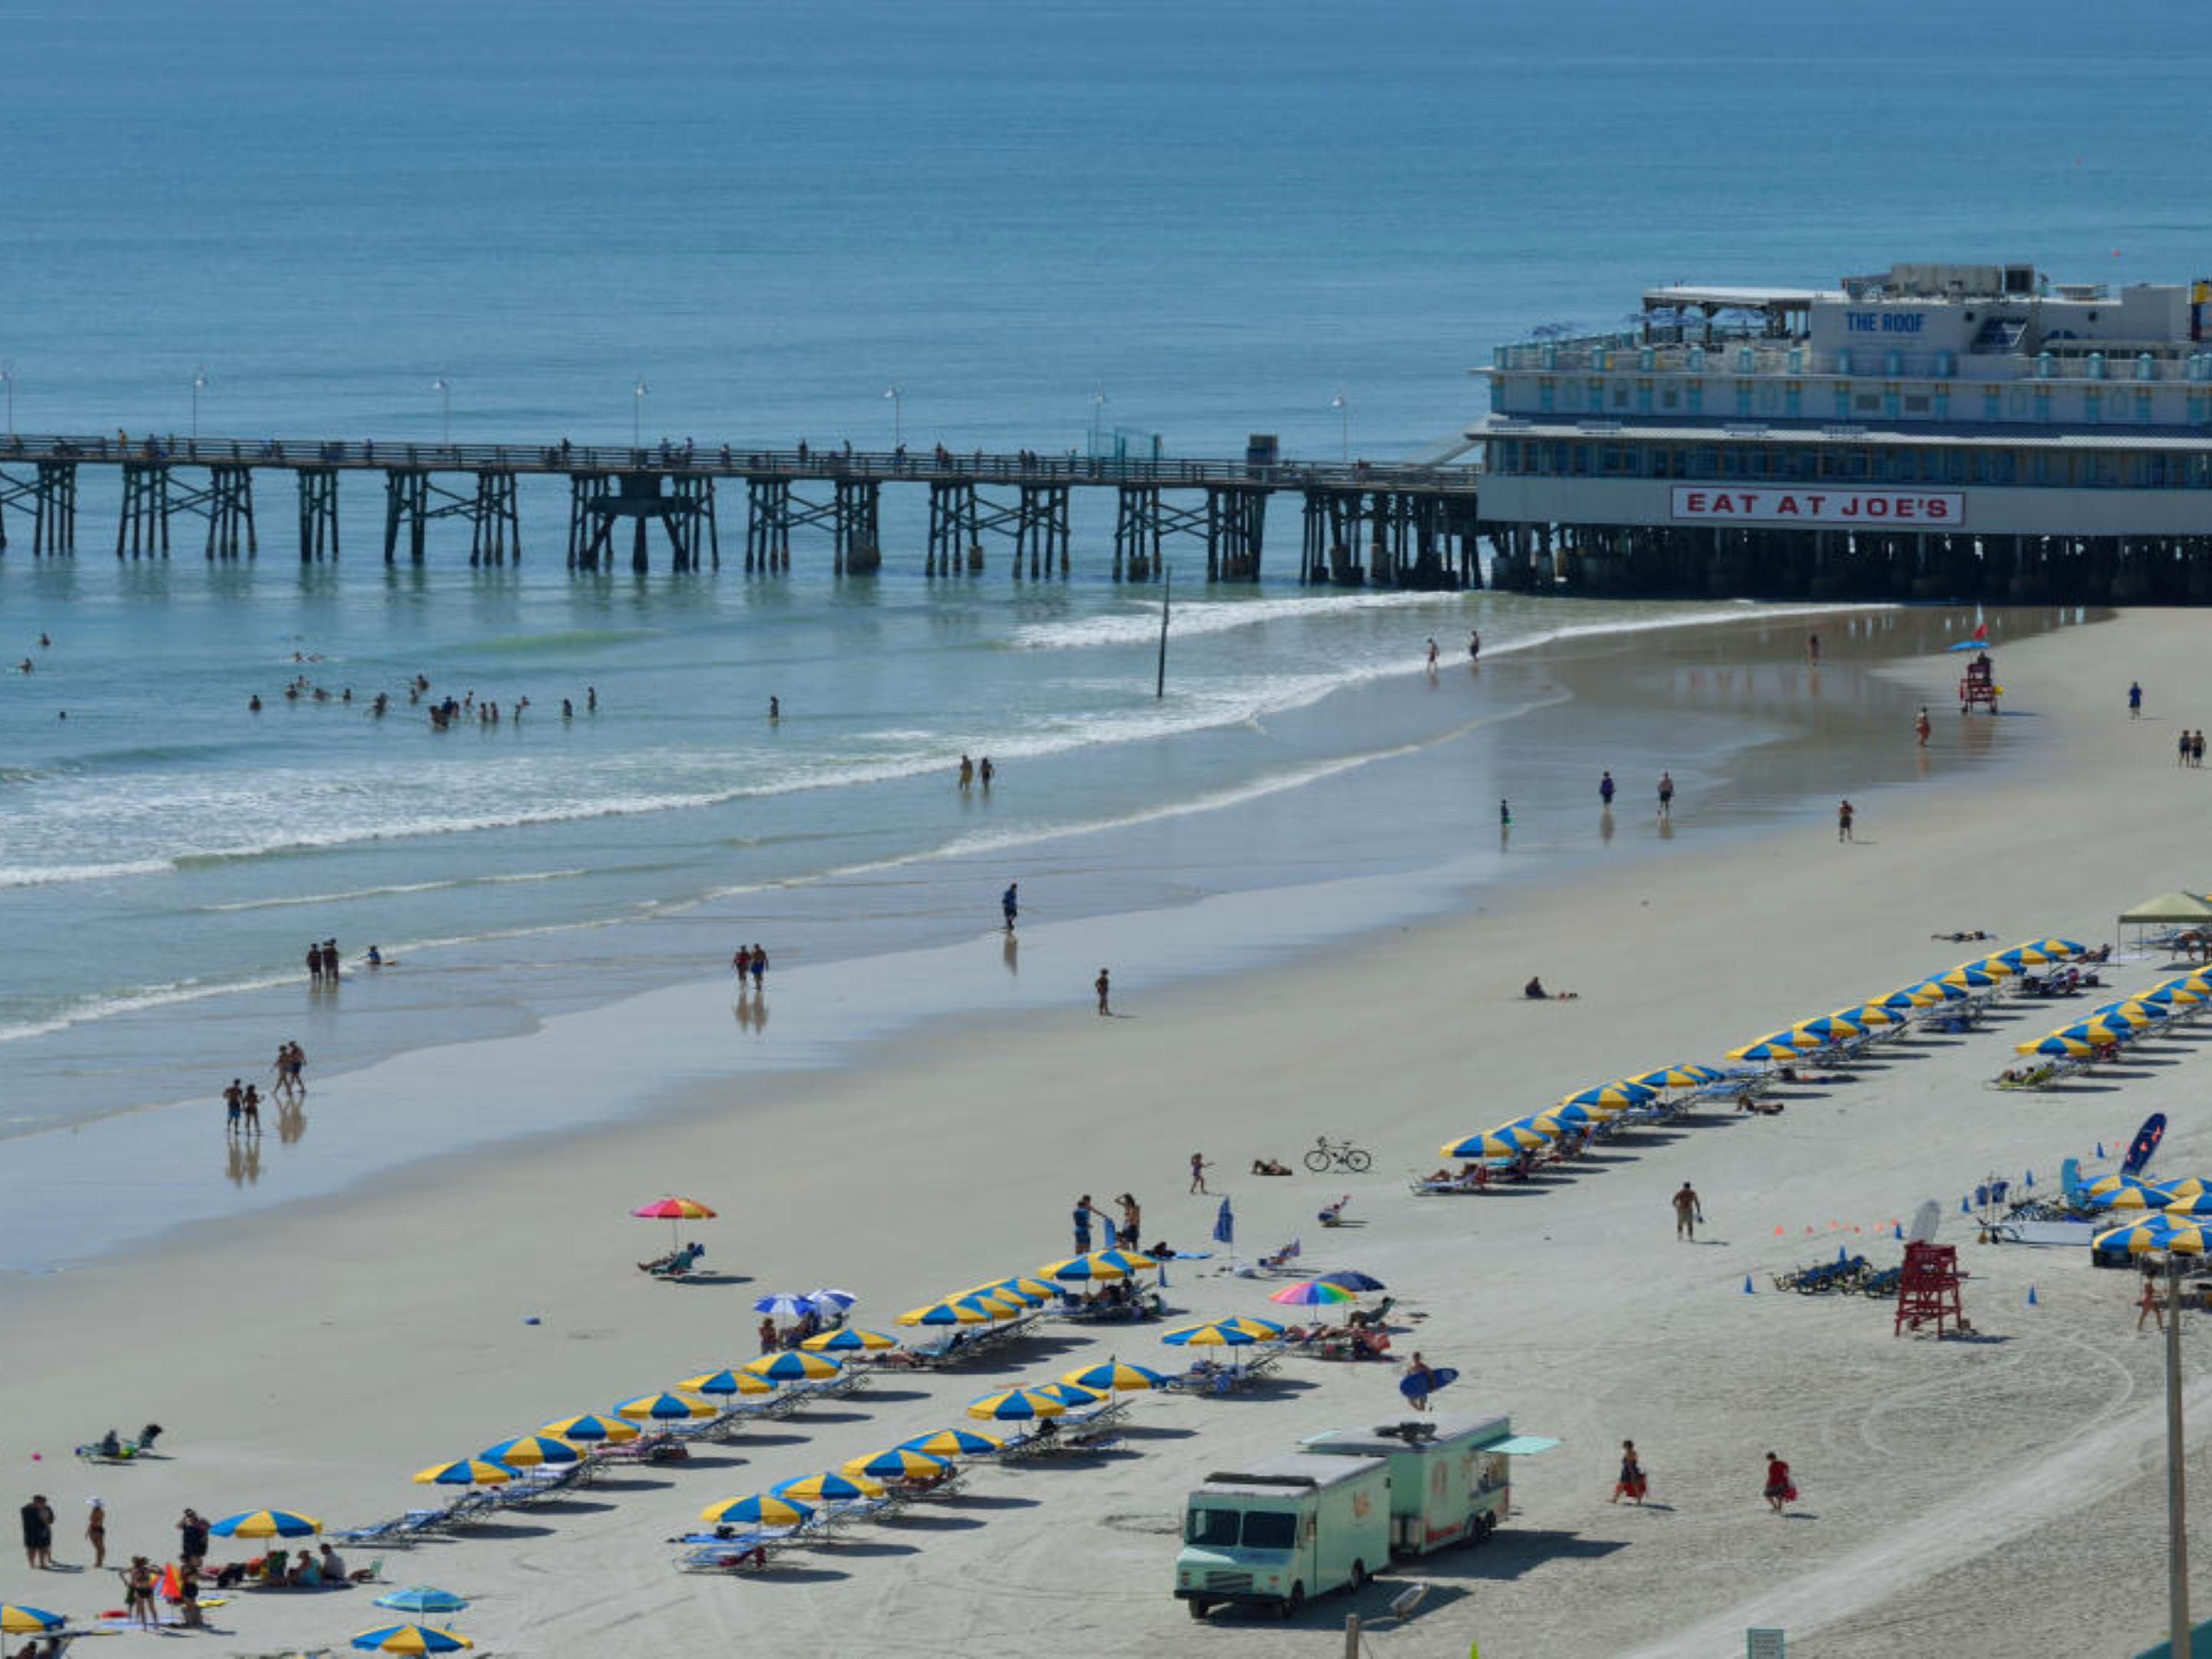 Located just a mile from our hotel, the boardwalk and pier feature Ocean Walk Shoppes, gift shops, snack bars, restaurants, and a classic arcade.  Also, enjoy a  Saturday night concert at the historic coquina amphitheater, the Daytona Beach Bandshell in Oceanfront Park.